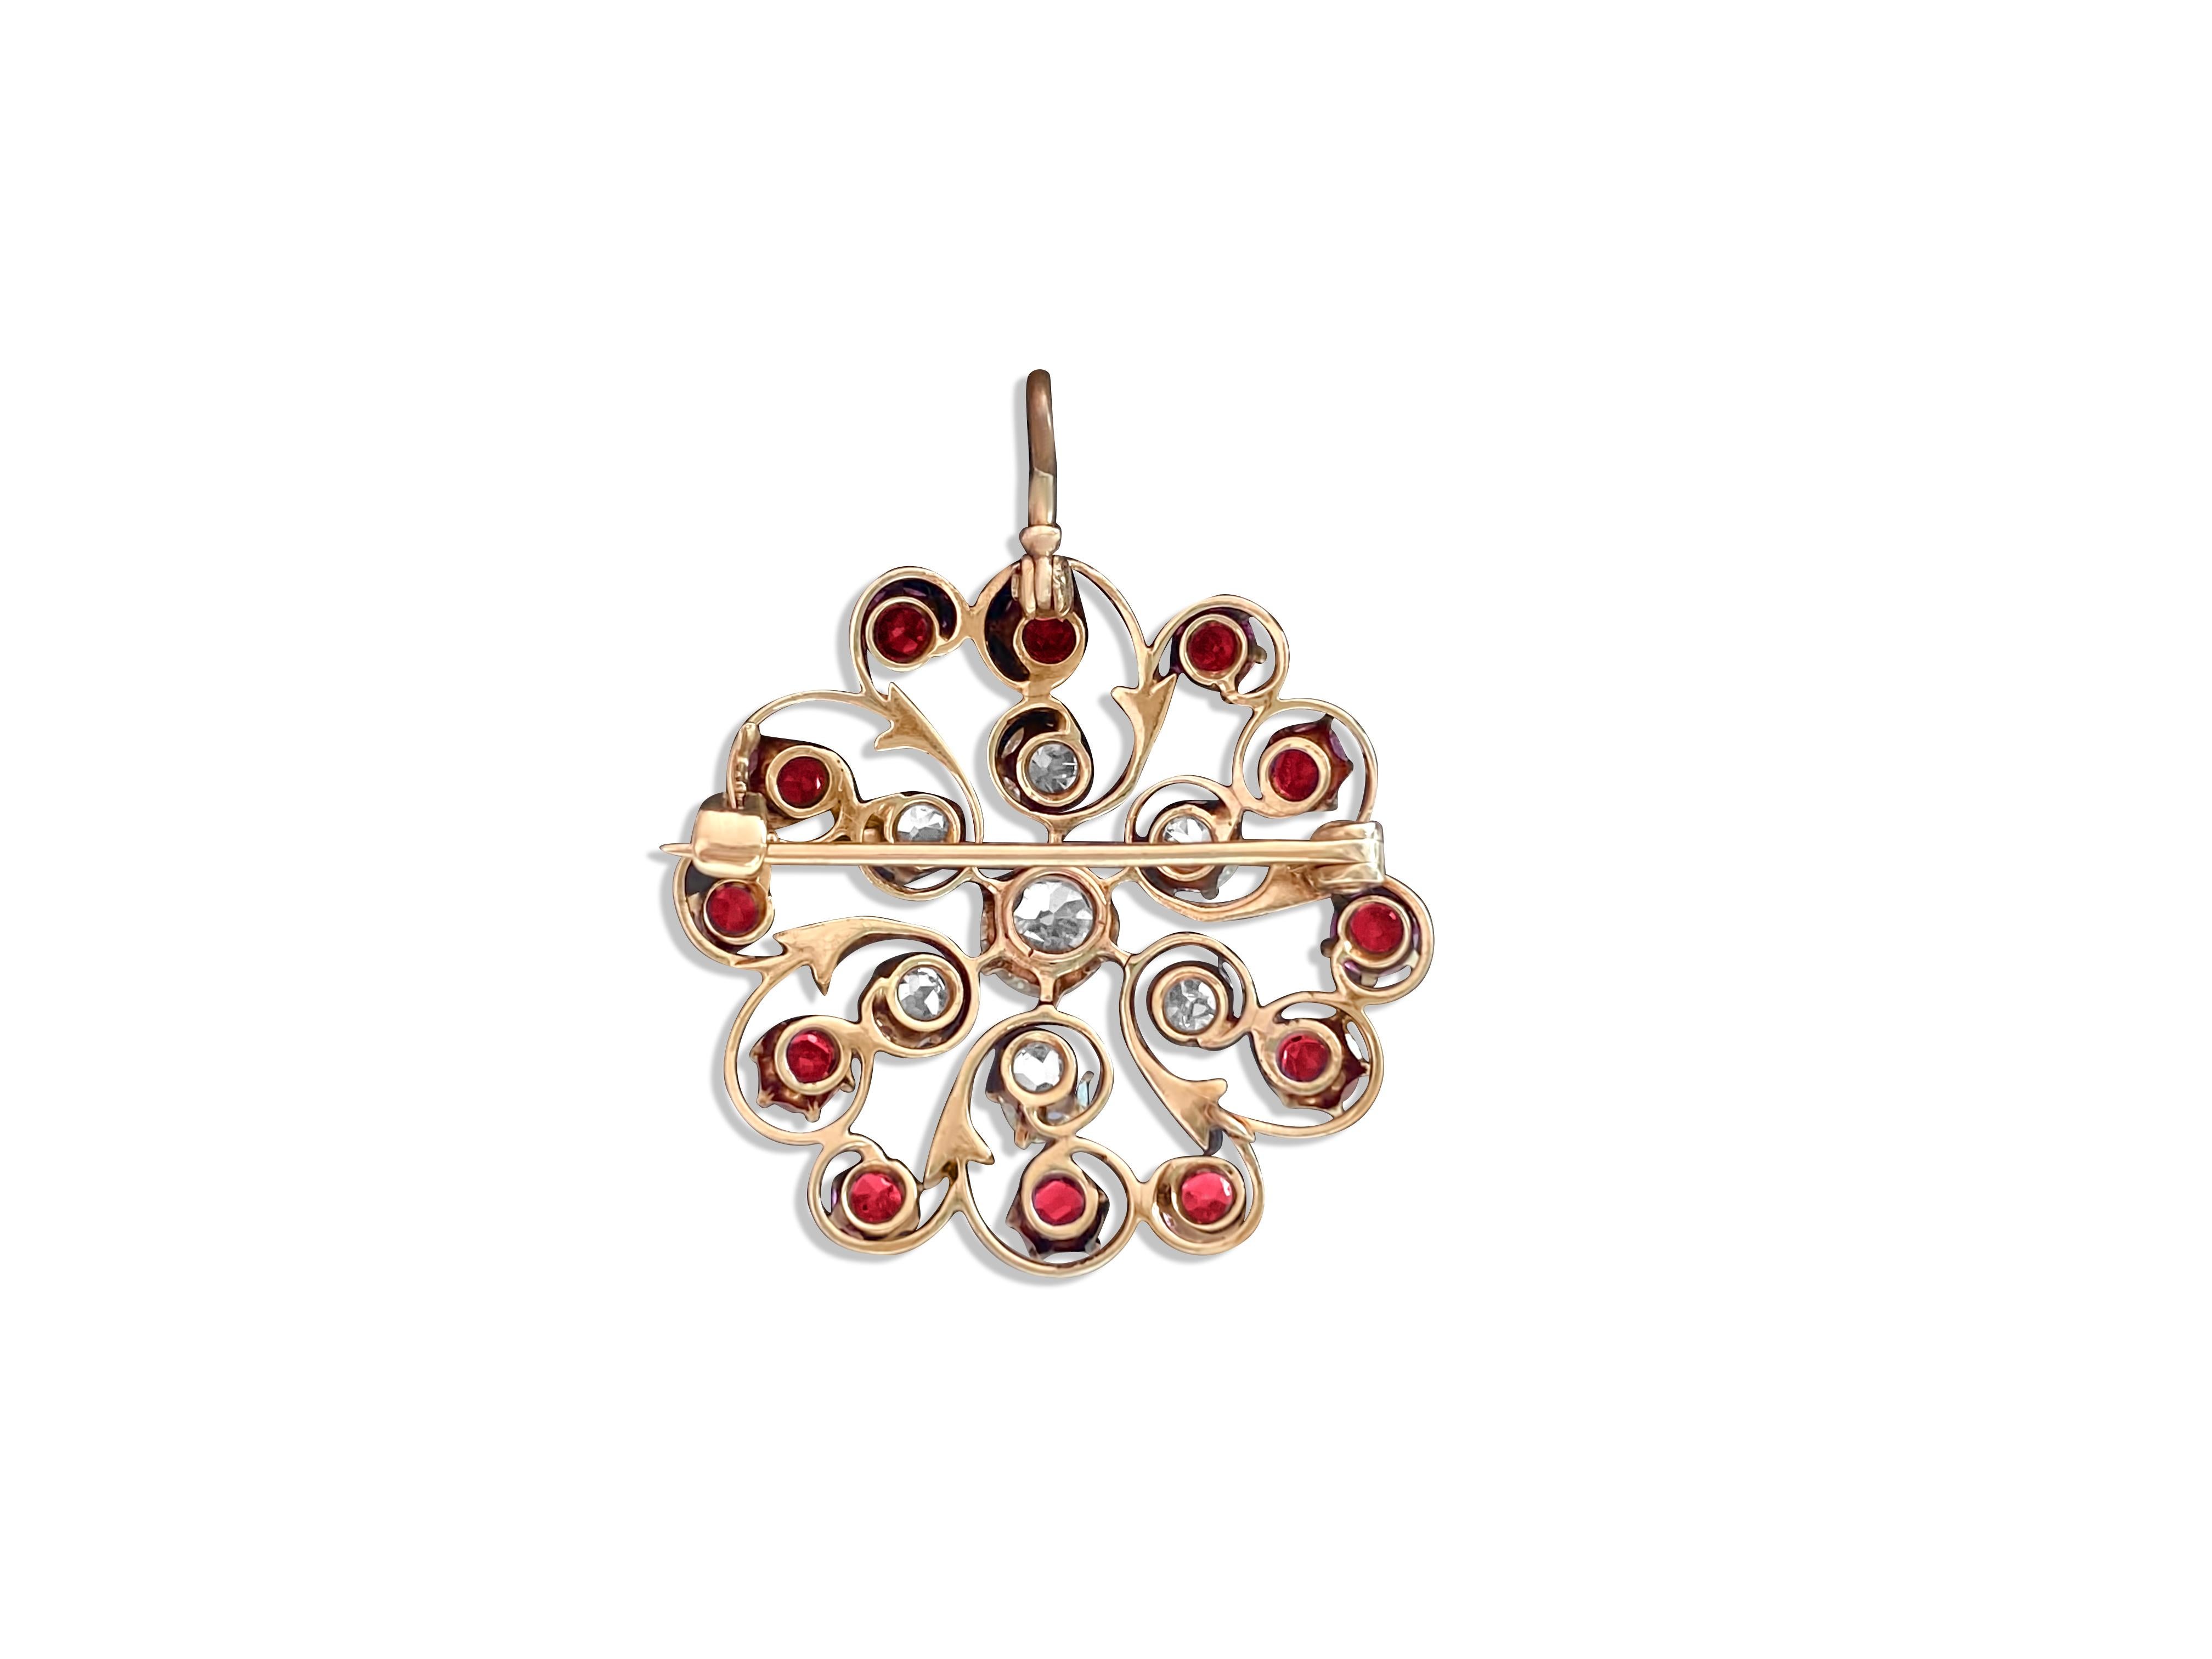 Crafted in 14k yellow gold, this stunning vintage piece features 1.70 carats of Old European cut diamonds with G color and SI clarity, complemented by a 2.00 carat round-cut Burma ruby, showcasing a deep red hue. With a total carat weight of 3.70